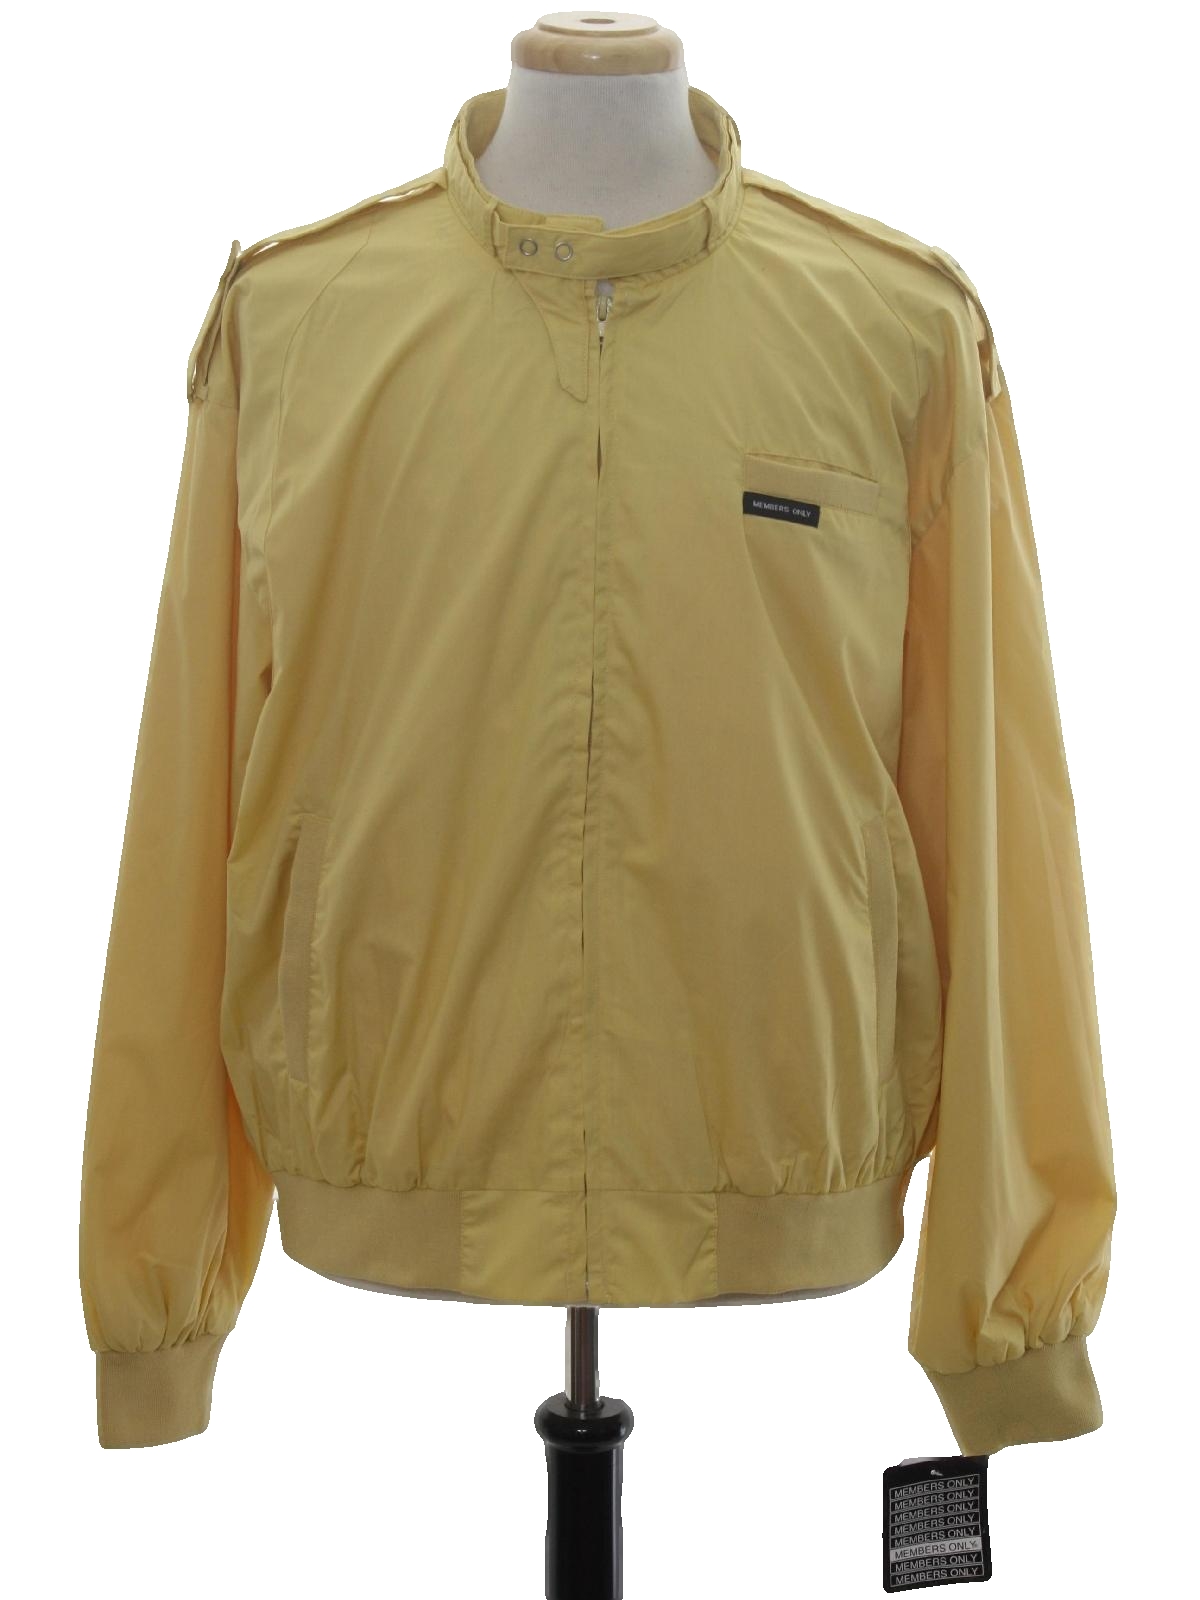 Vintage Members Only 80's Jacket: 80s -Members Only- Mens yellow butter ...